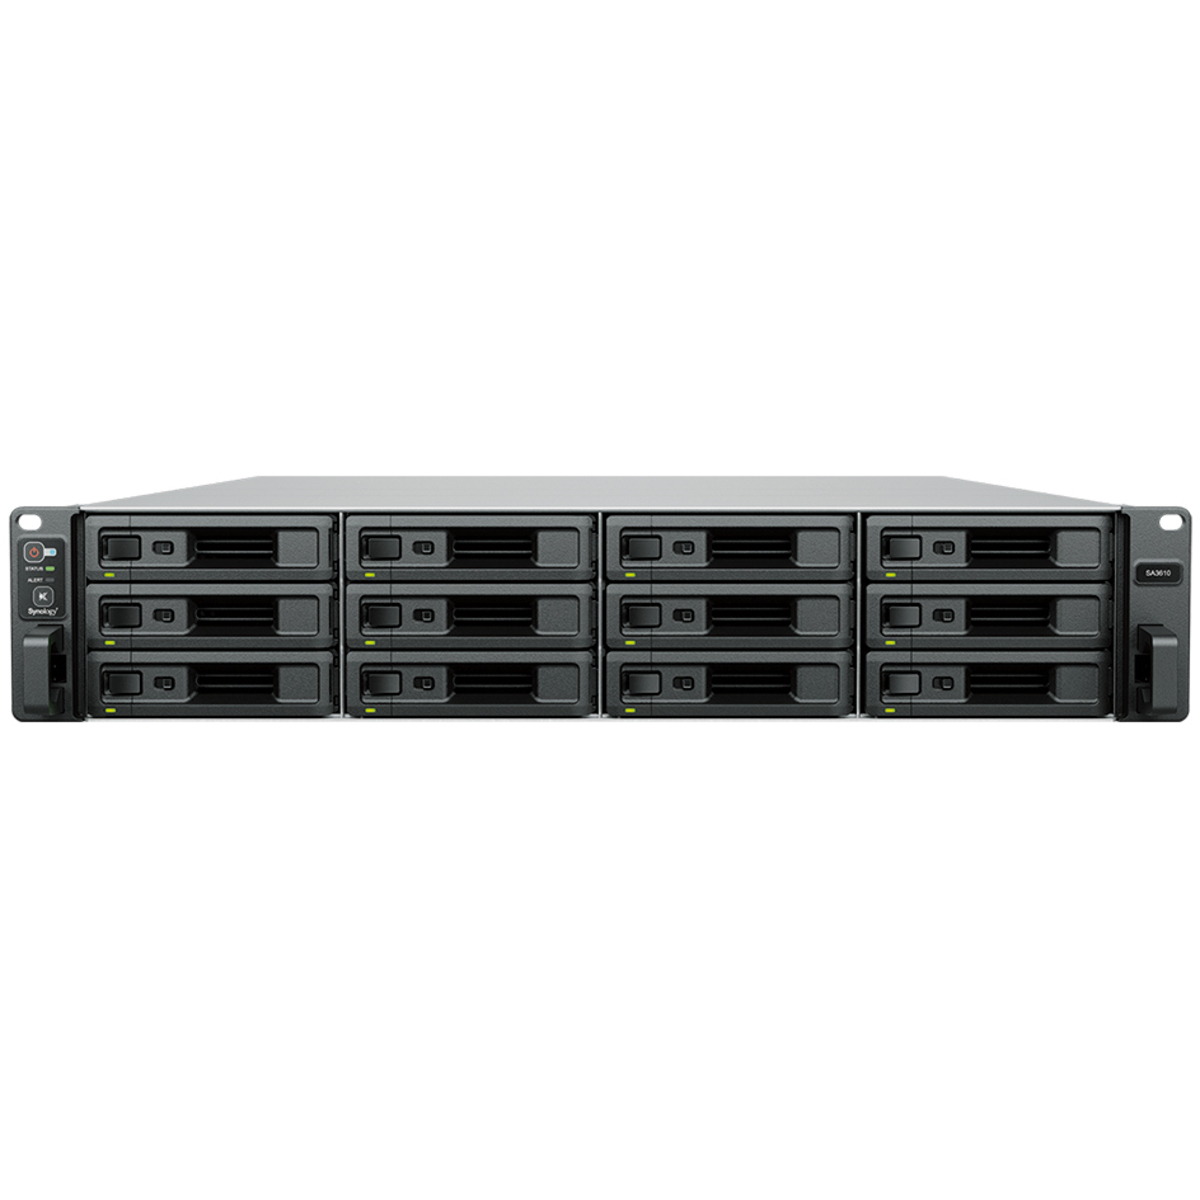 Synology RackStation SA3410 44tb 12-Bay RackMount Large Business / Enterprise NAS - Network Attached Storage Device 11x4tb Western Digital Blue WD40EZRZ 3.5 5400rpm SATA 6Gb/s HDD CONSUMER Class Drives Installed - Burn-In Tested RackStation SA3410